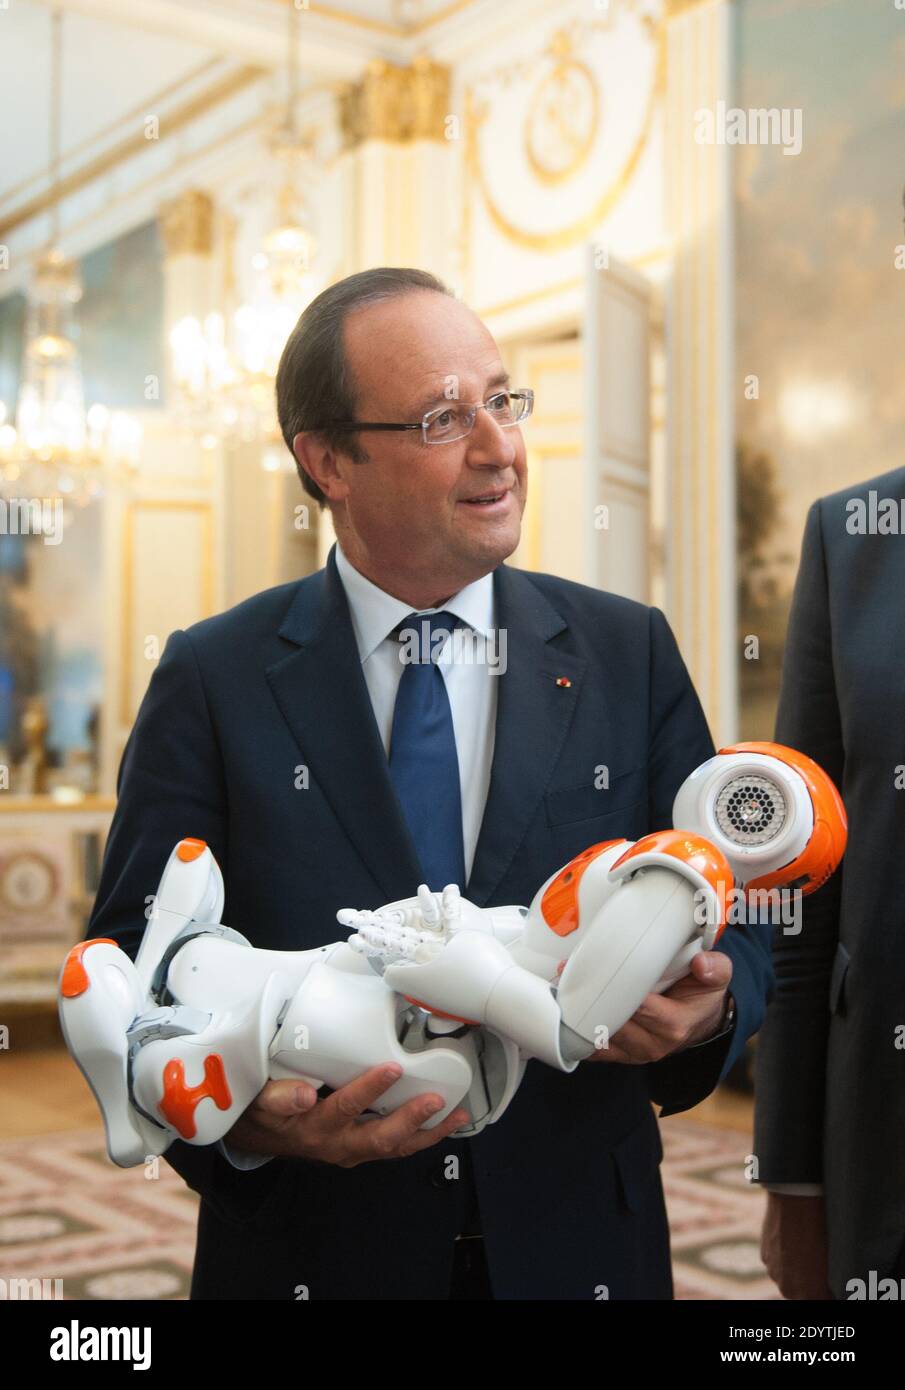 France's President Francois Hollande holds an humanoid robot 'Nao' from Aldebaran Robotics company as he visits an exhibition on French industrial design and technology at the Elysee Palace in Paris, France on September 12, 2013. Photo by Thierry Orban/ABACAPRESS.COM Stock Photo